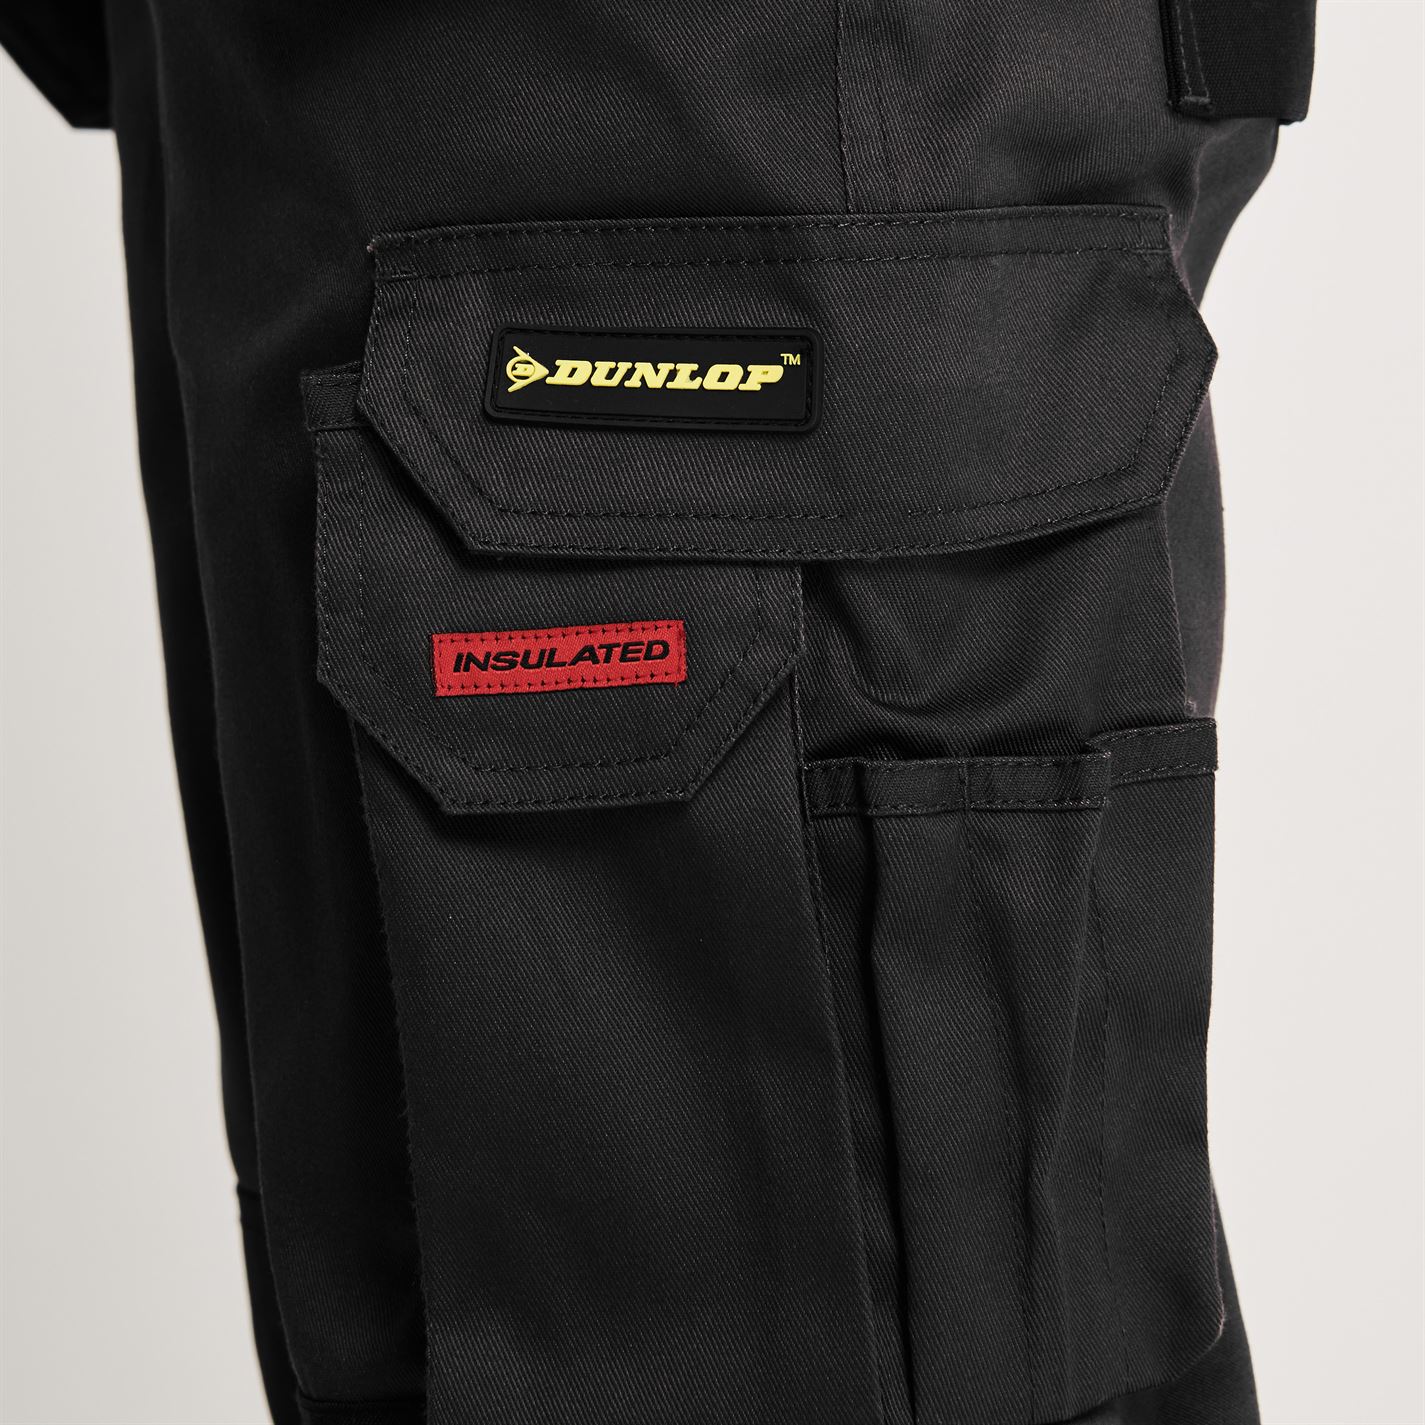 Dunlop work trousers (not used) offers available | in Portsmouth, Hampshire  | Gumtree